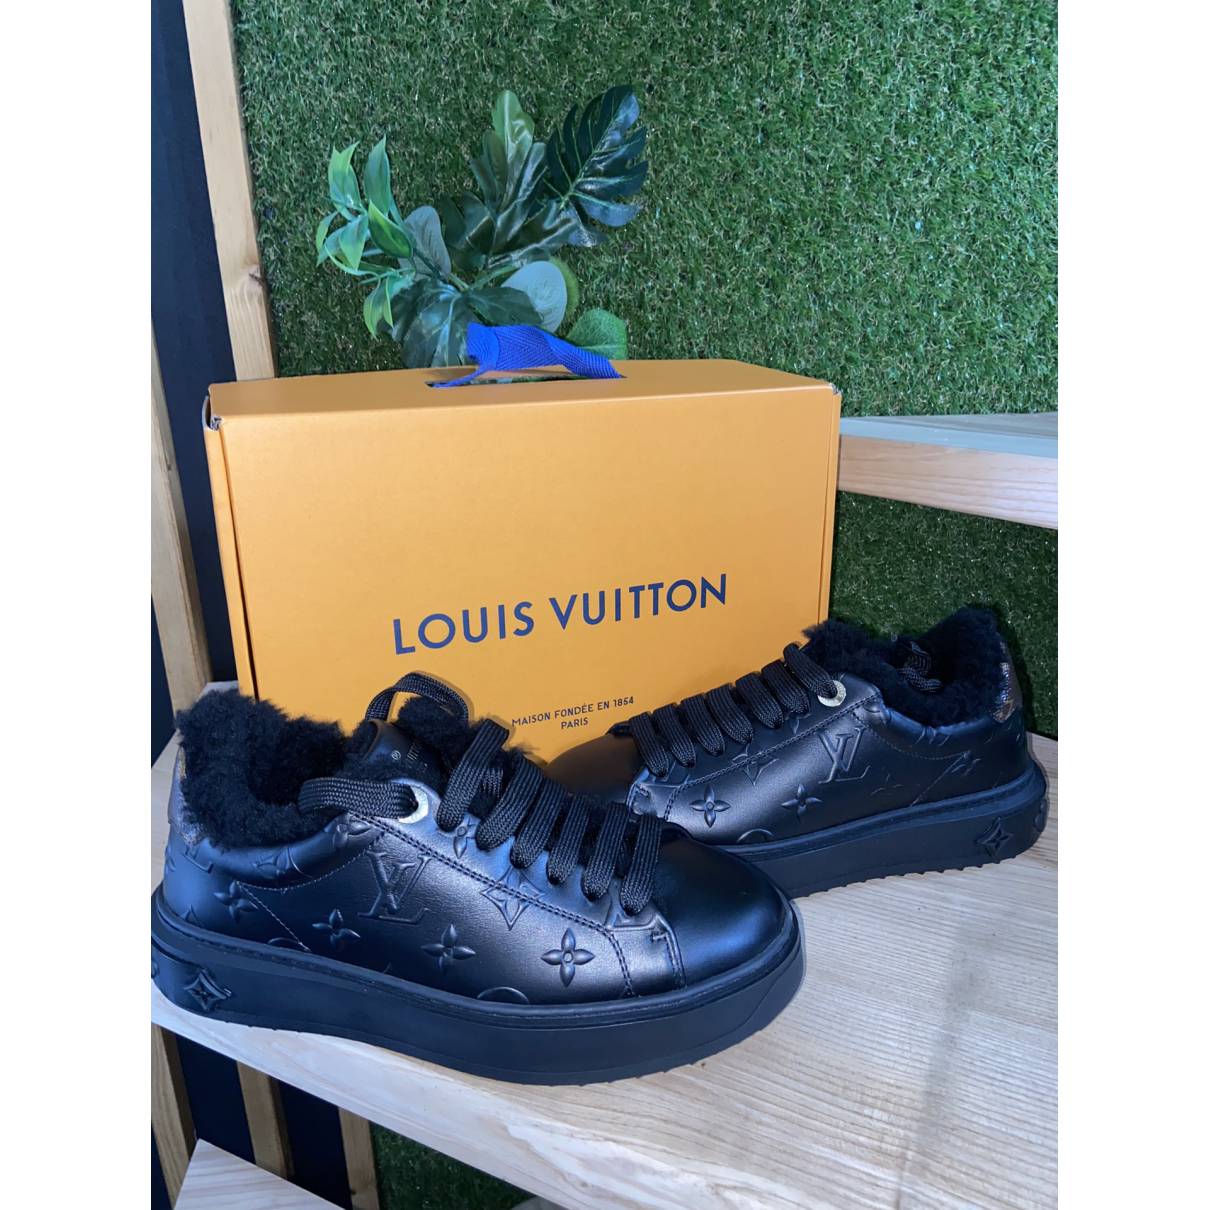 Time out leather trainers Louis Vuitton Black size 35 EU in